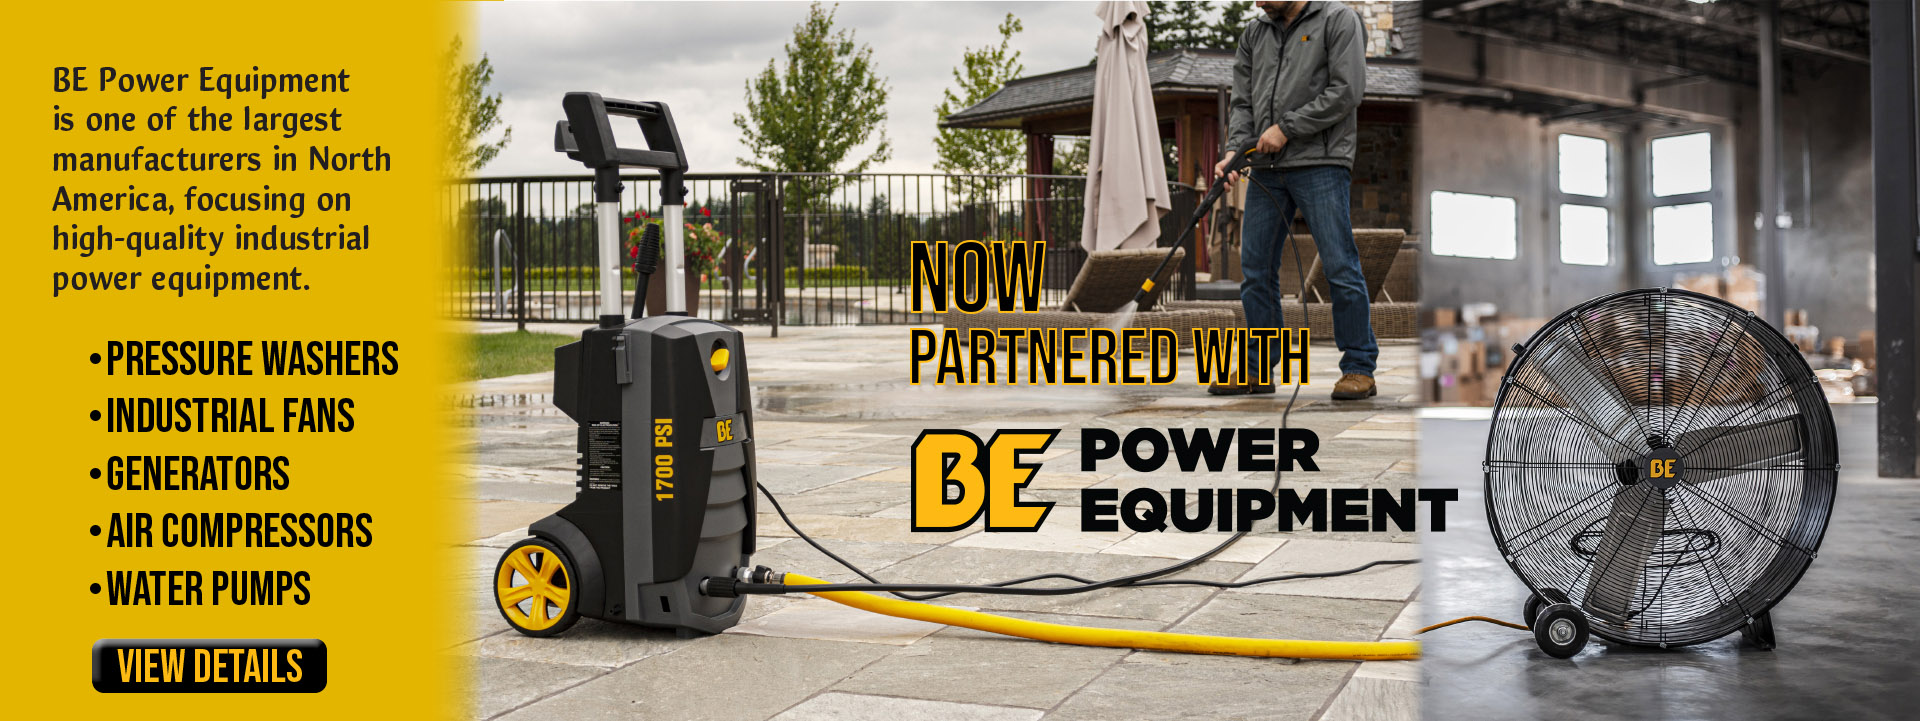 Now partnered with BE Power Equipment